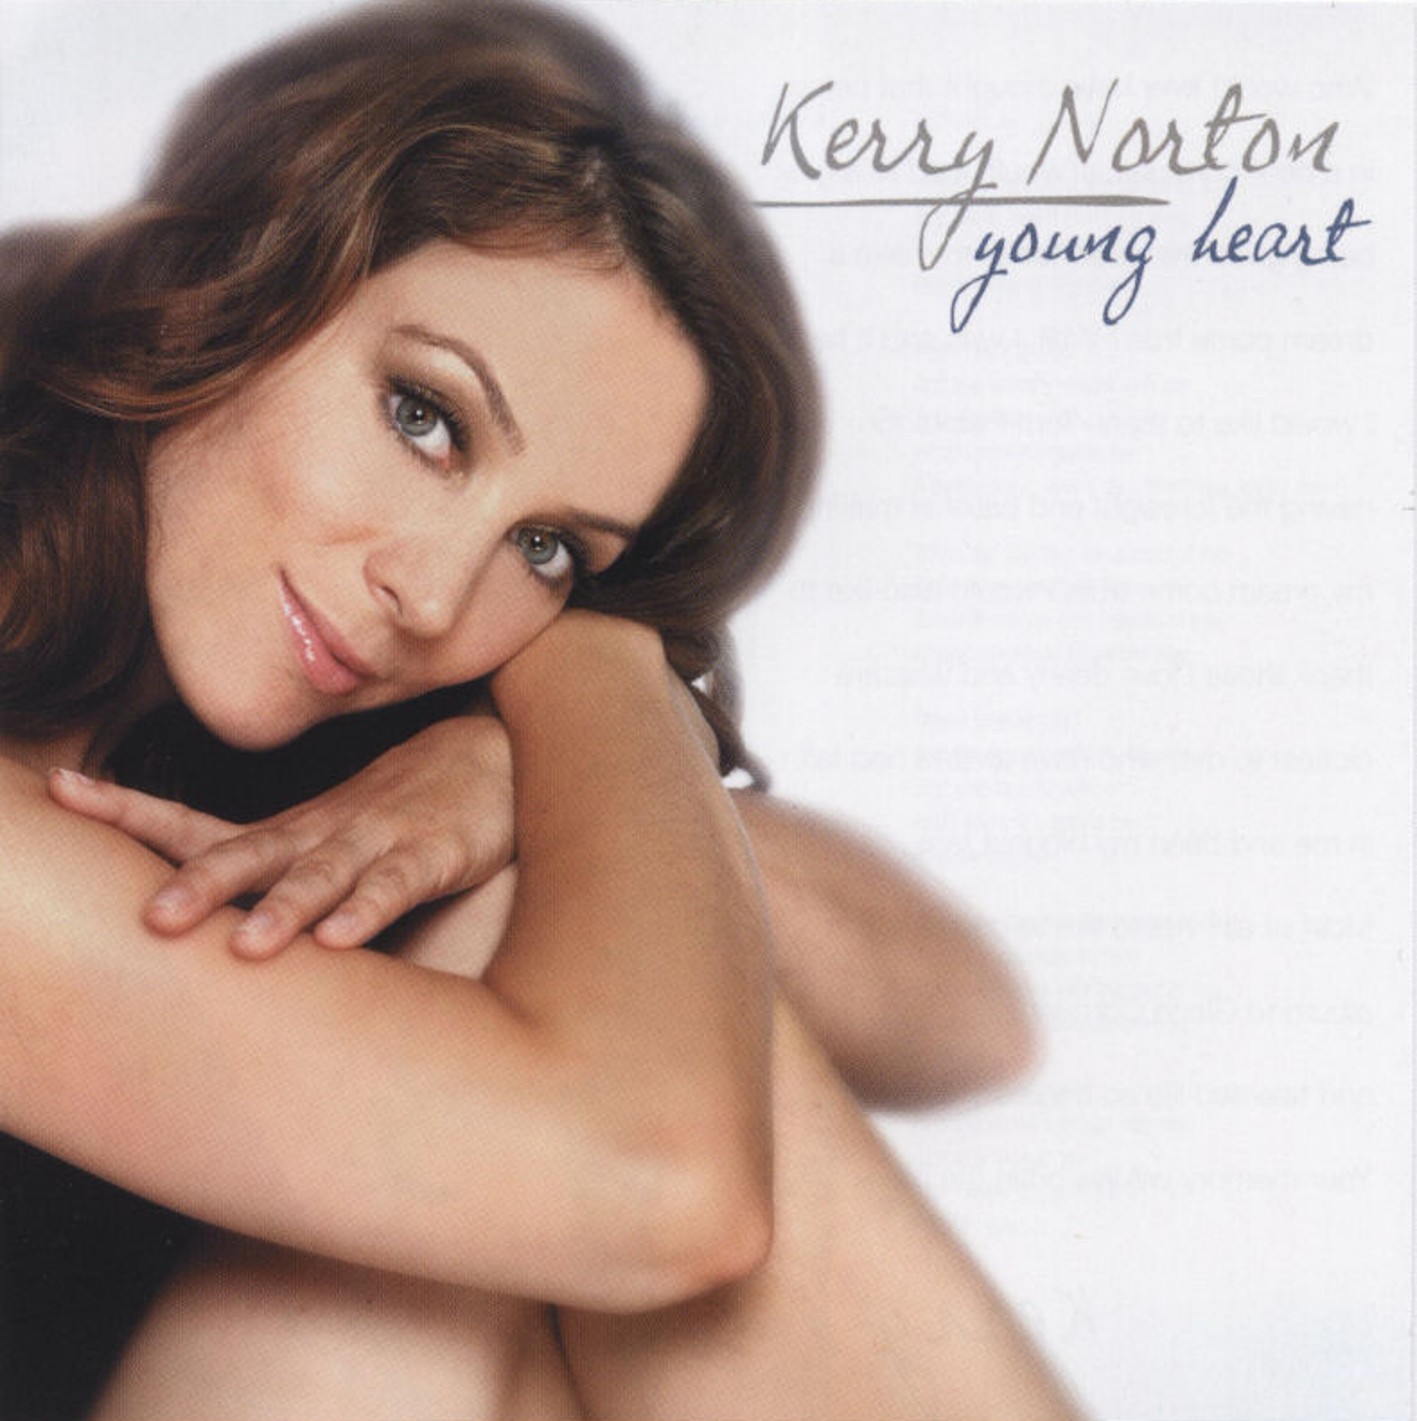 Kerry Norton - Young heart